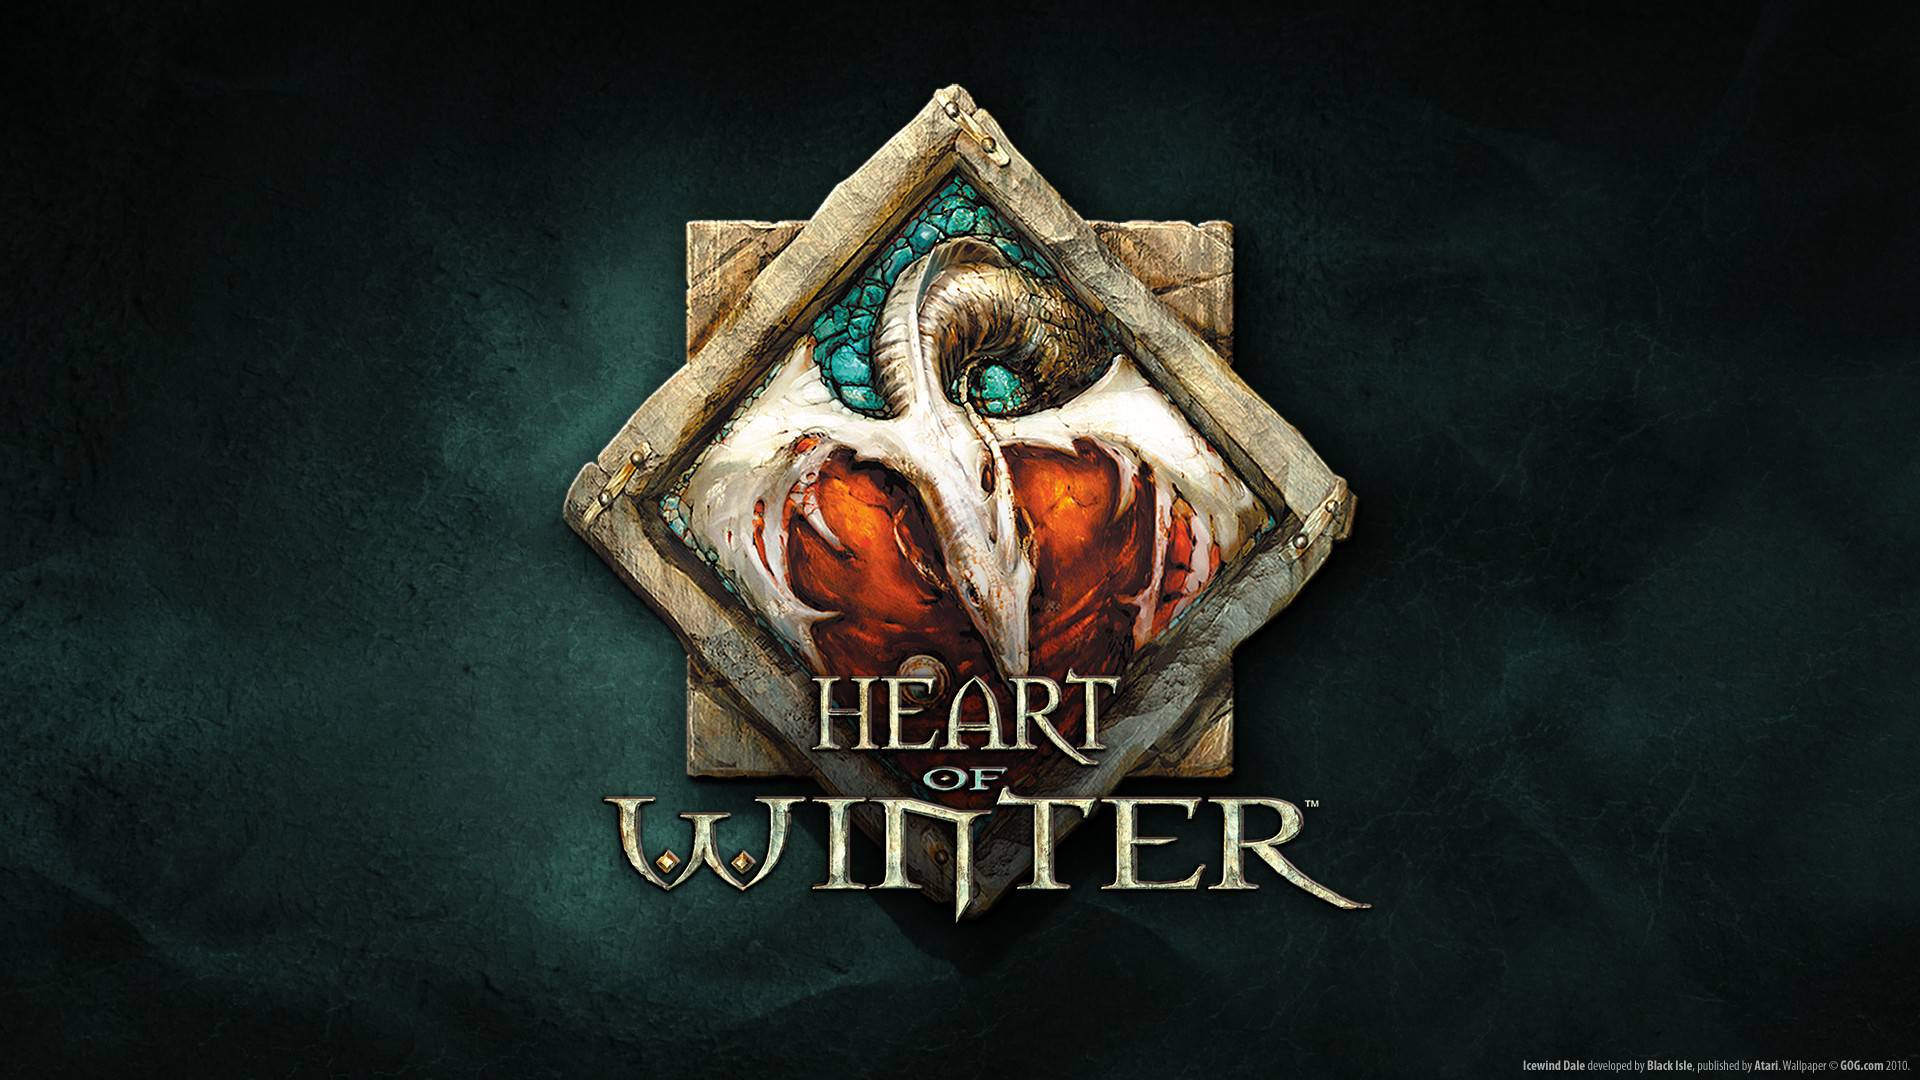 Winter heart icewind dale wallpaper [2] - (#23475) - High Quality ...